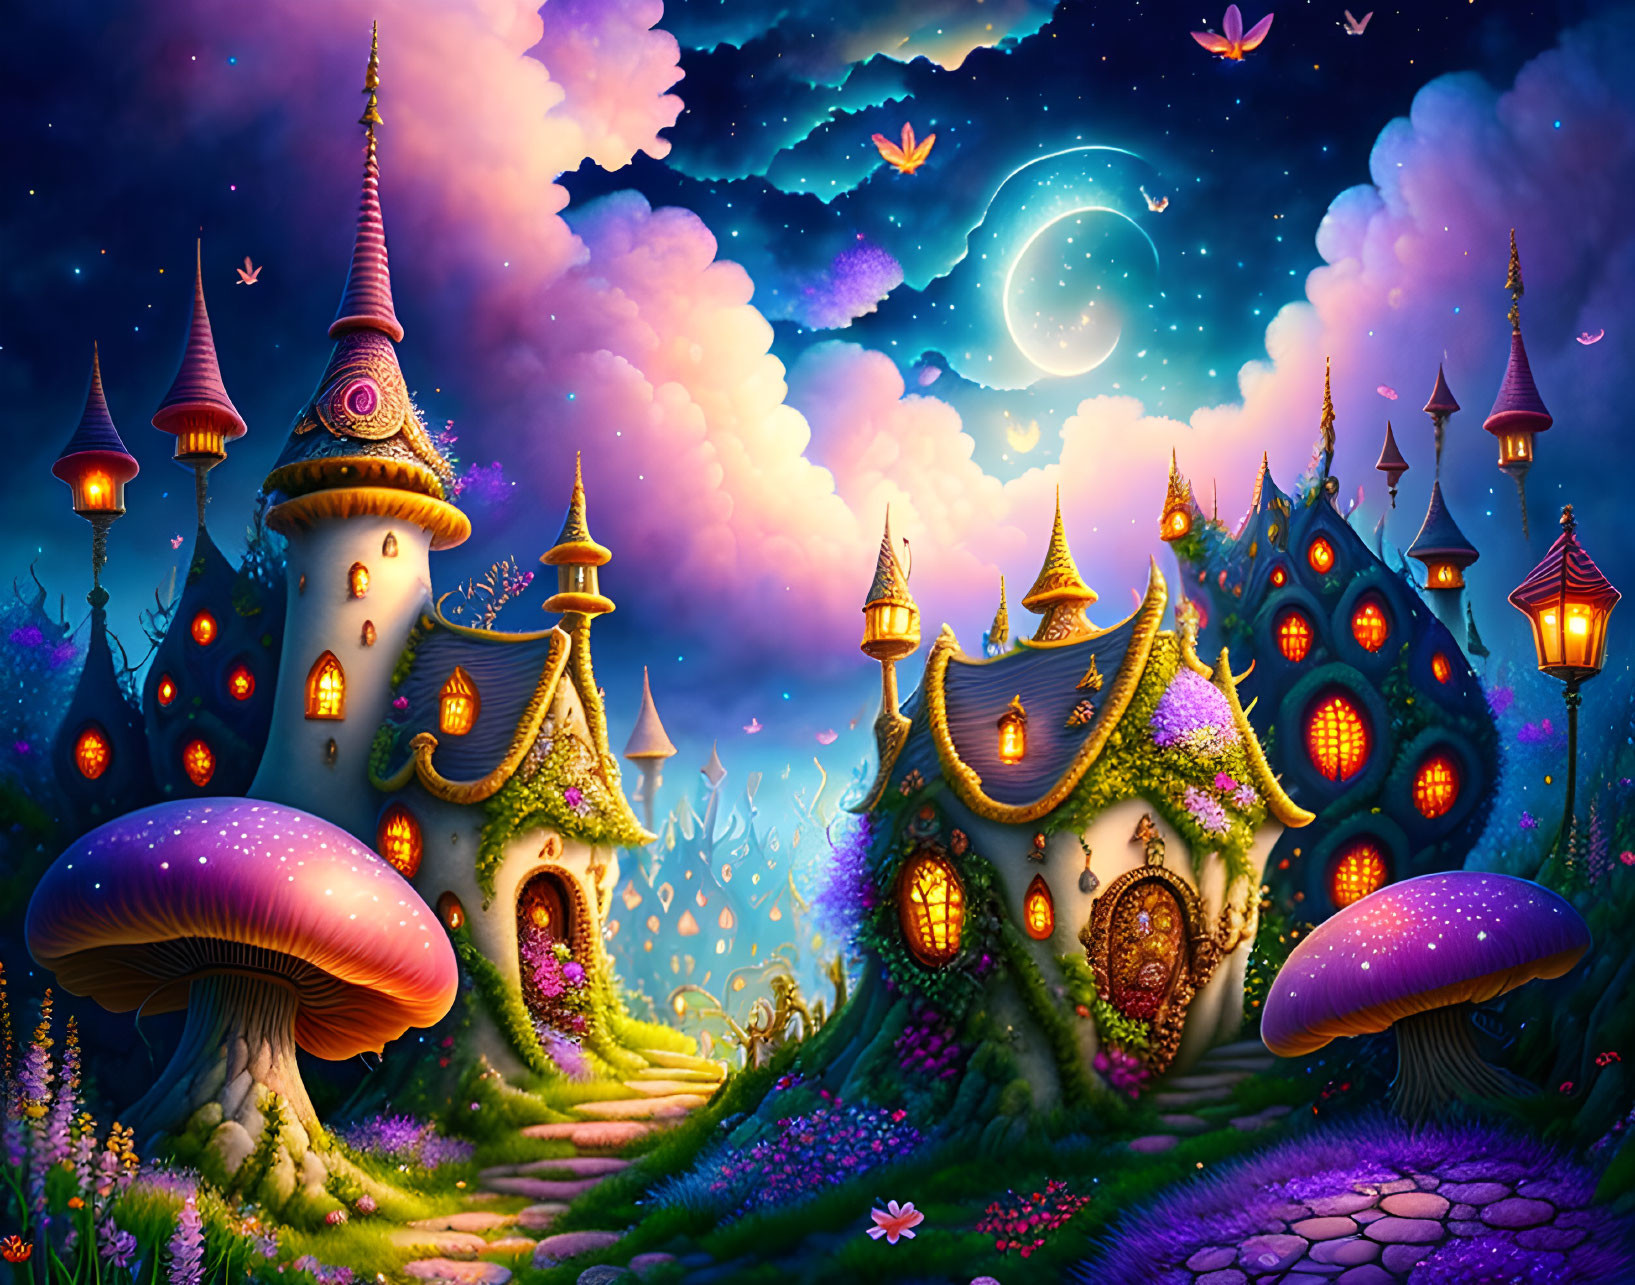 Whimsical night scene with mushroom houses and crescent moon